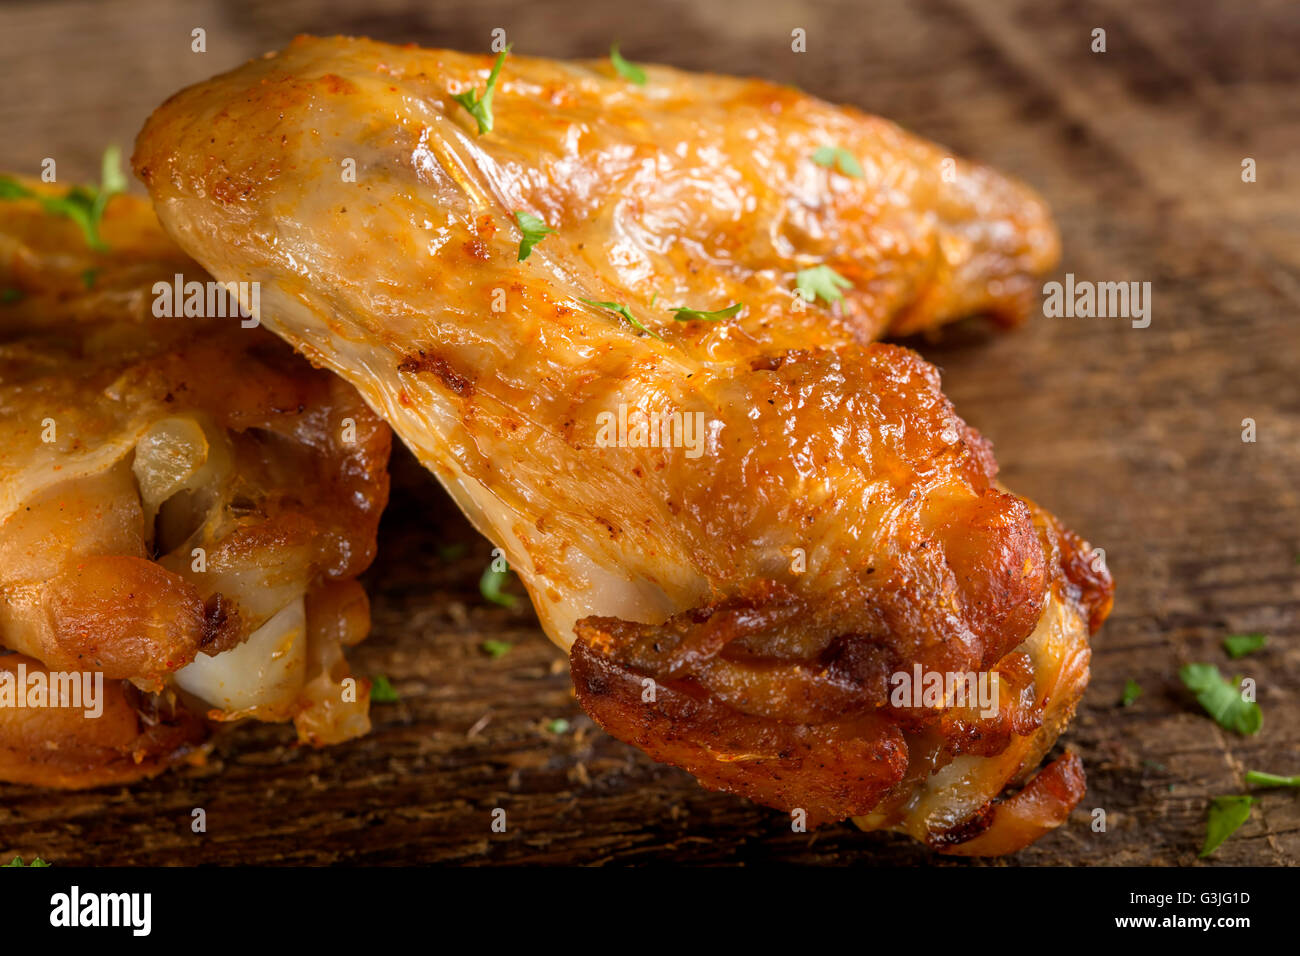 Close up of fried chicken wings on wood board with some fresh parsley Stock Photo